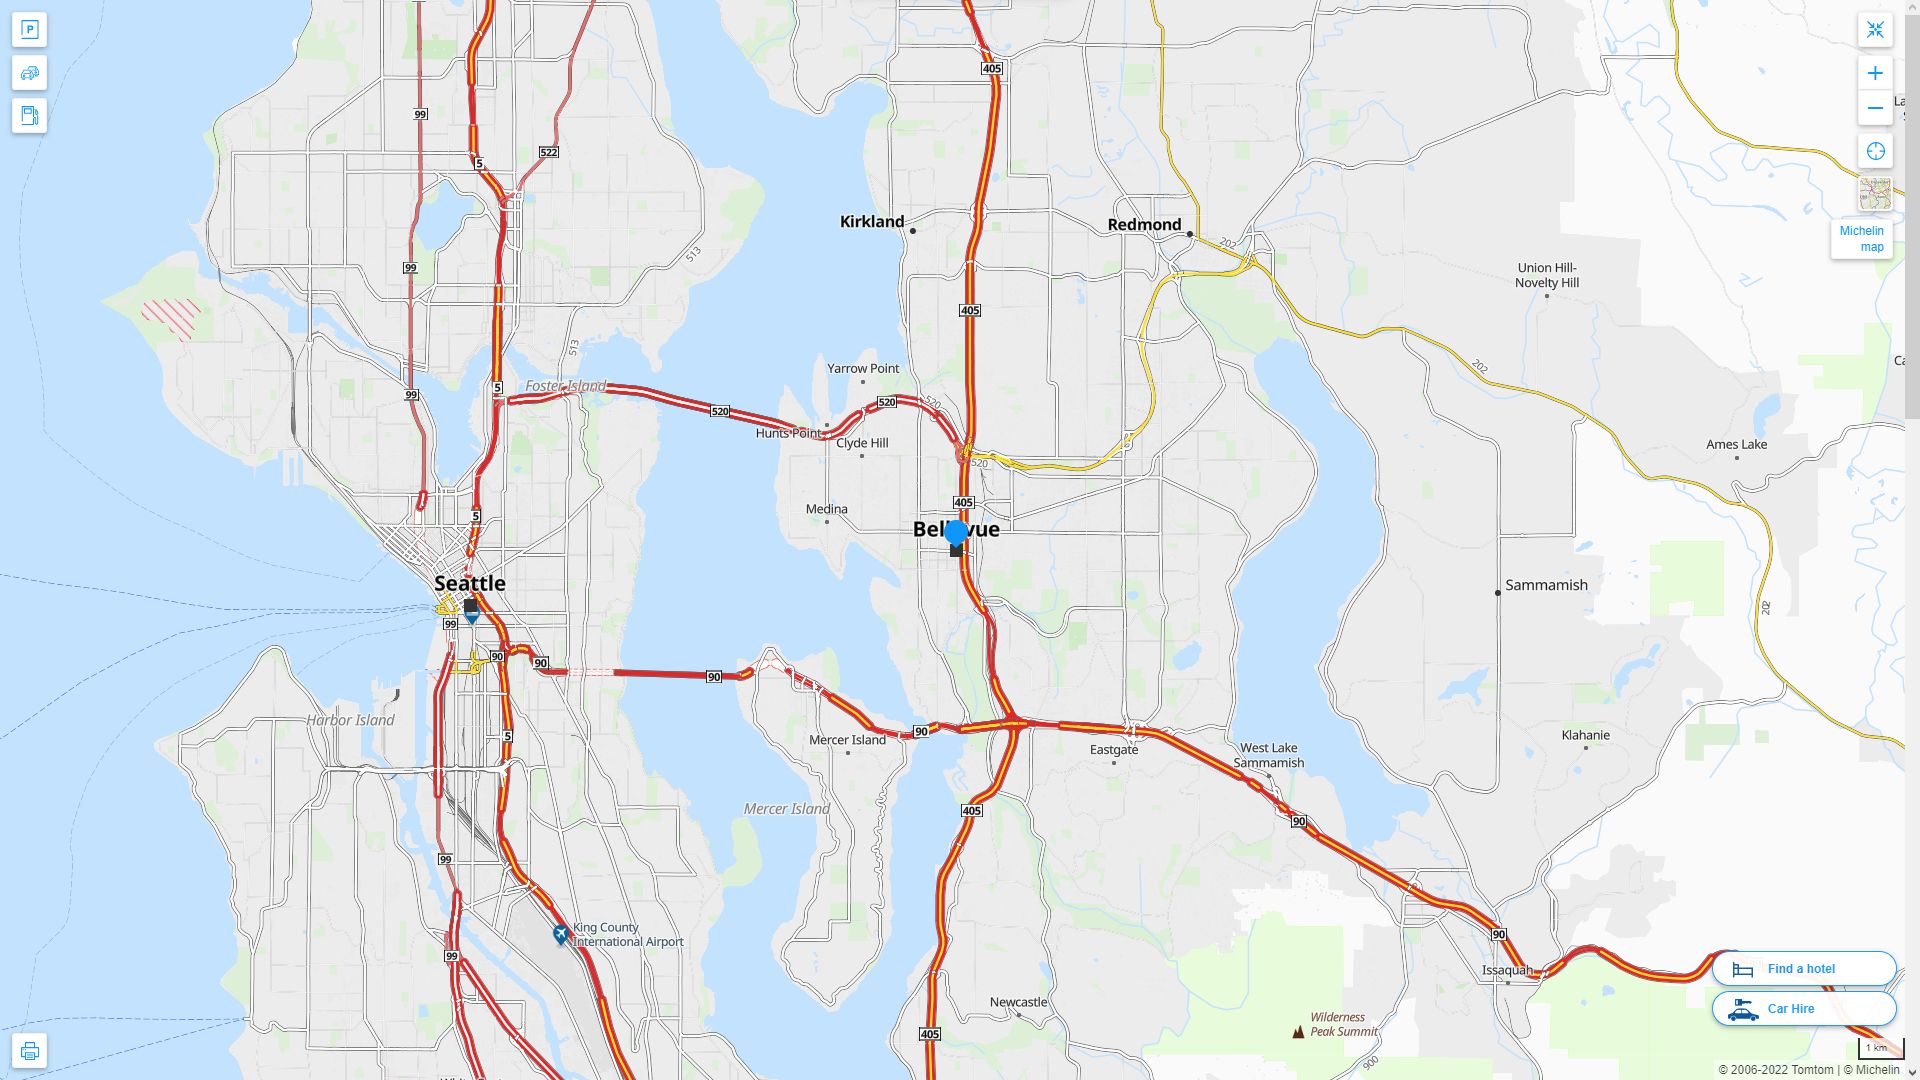 Bellevue Washington Highway and Road Map